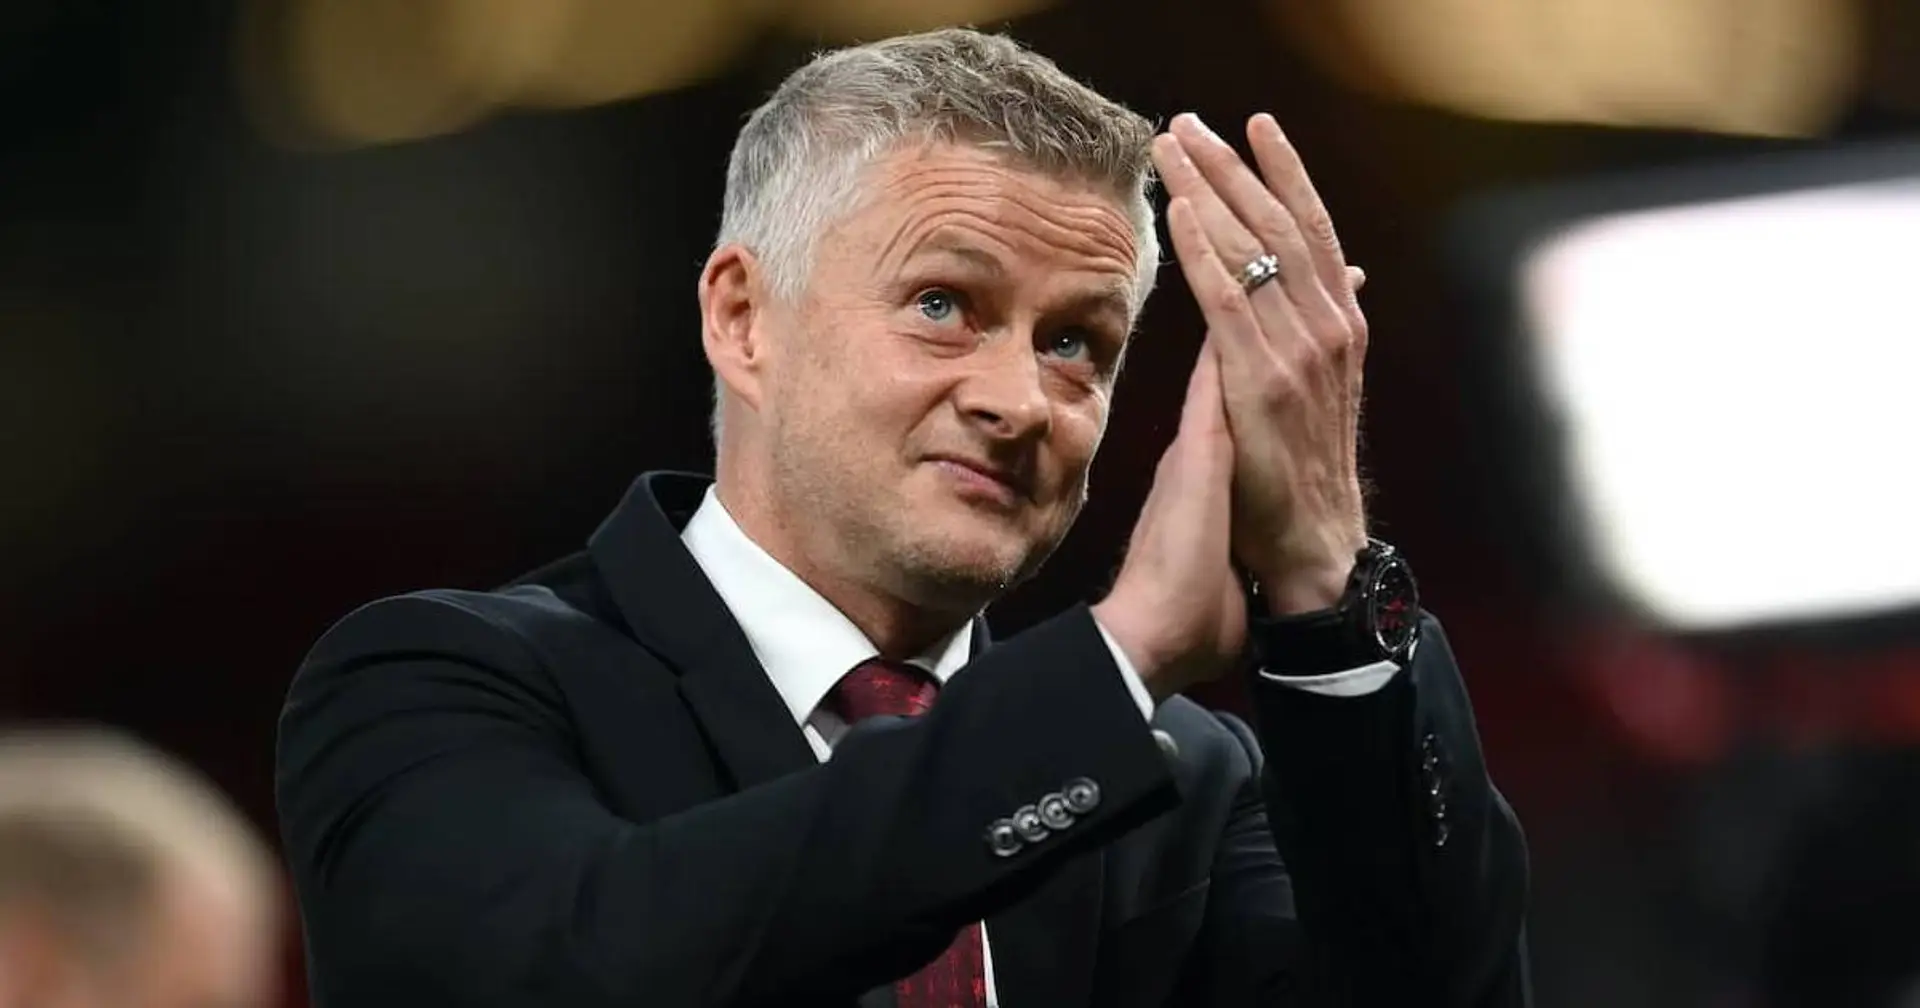 Leicester City targetting Solskjaer to take charge & 3 latest under-radar Man United stories